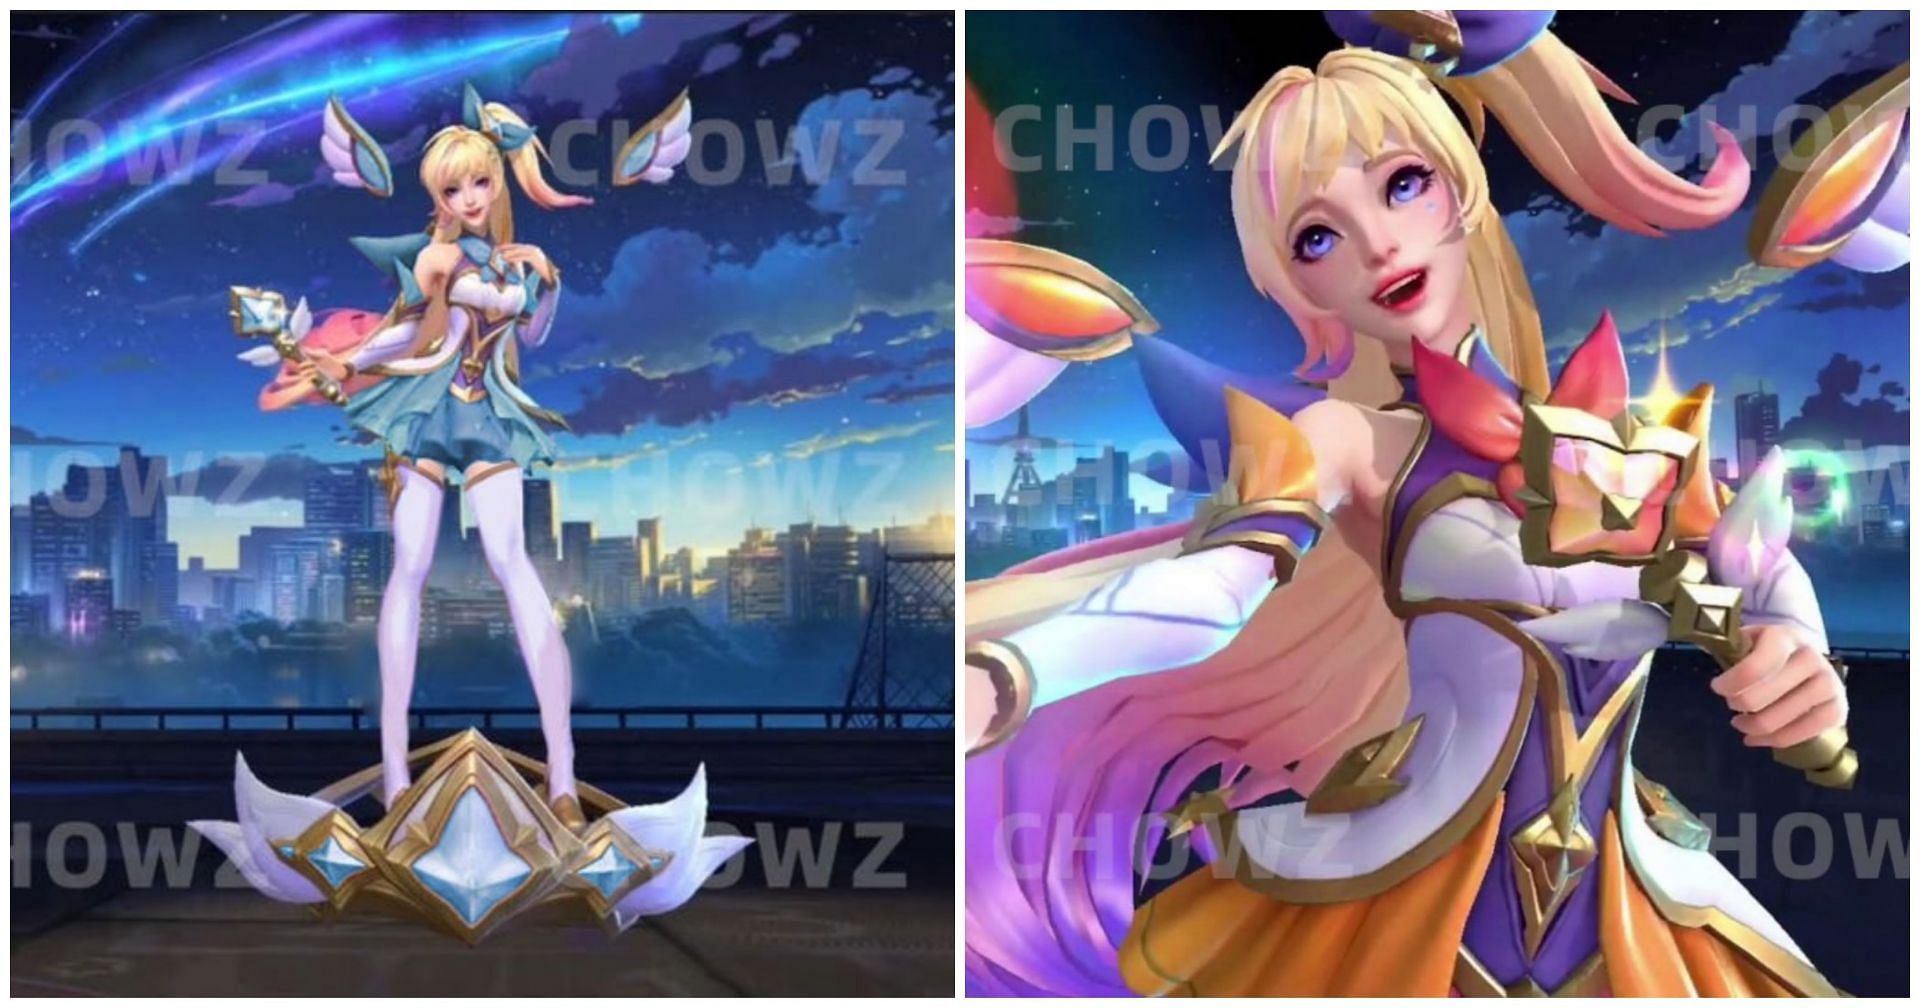 Leaked images of Star GuardianSeraphine, a League of Legends: Wild Rift exclusive (Image via chowZ)